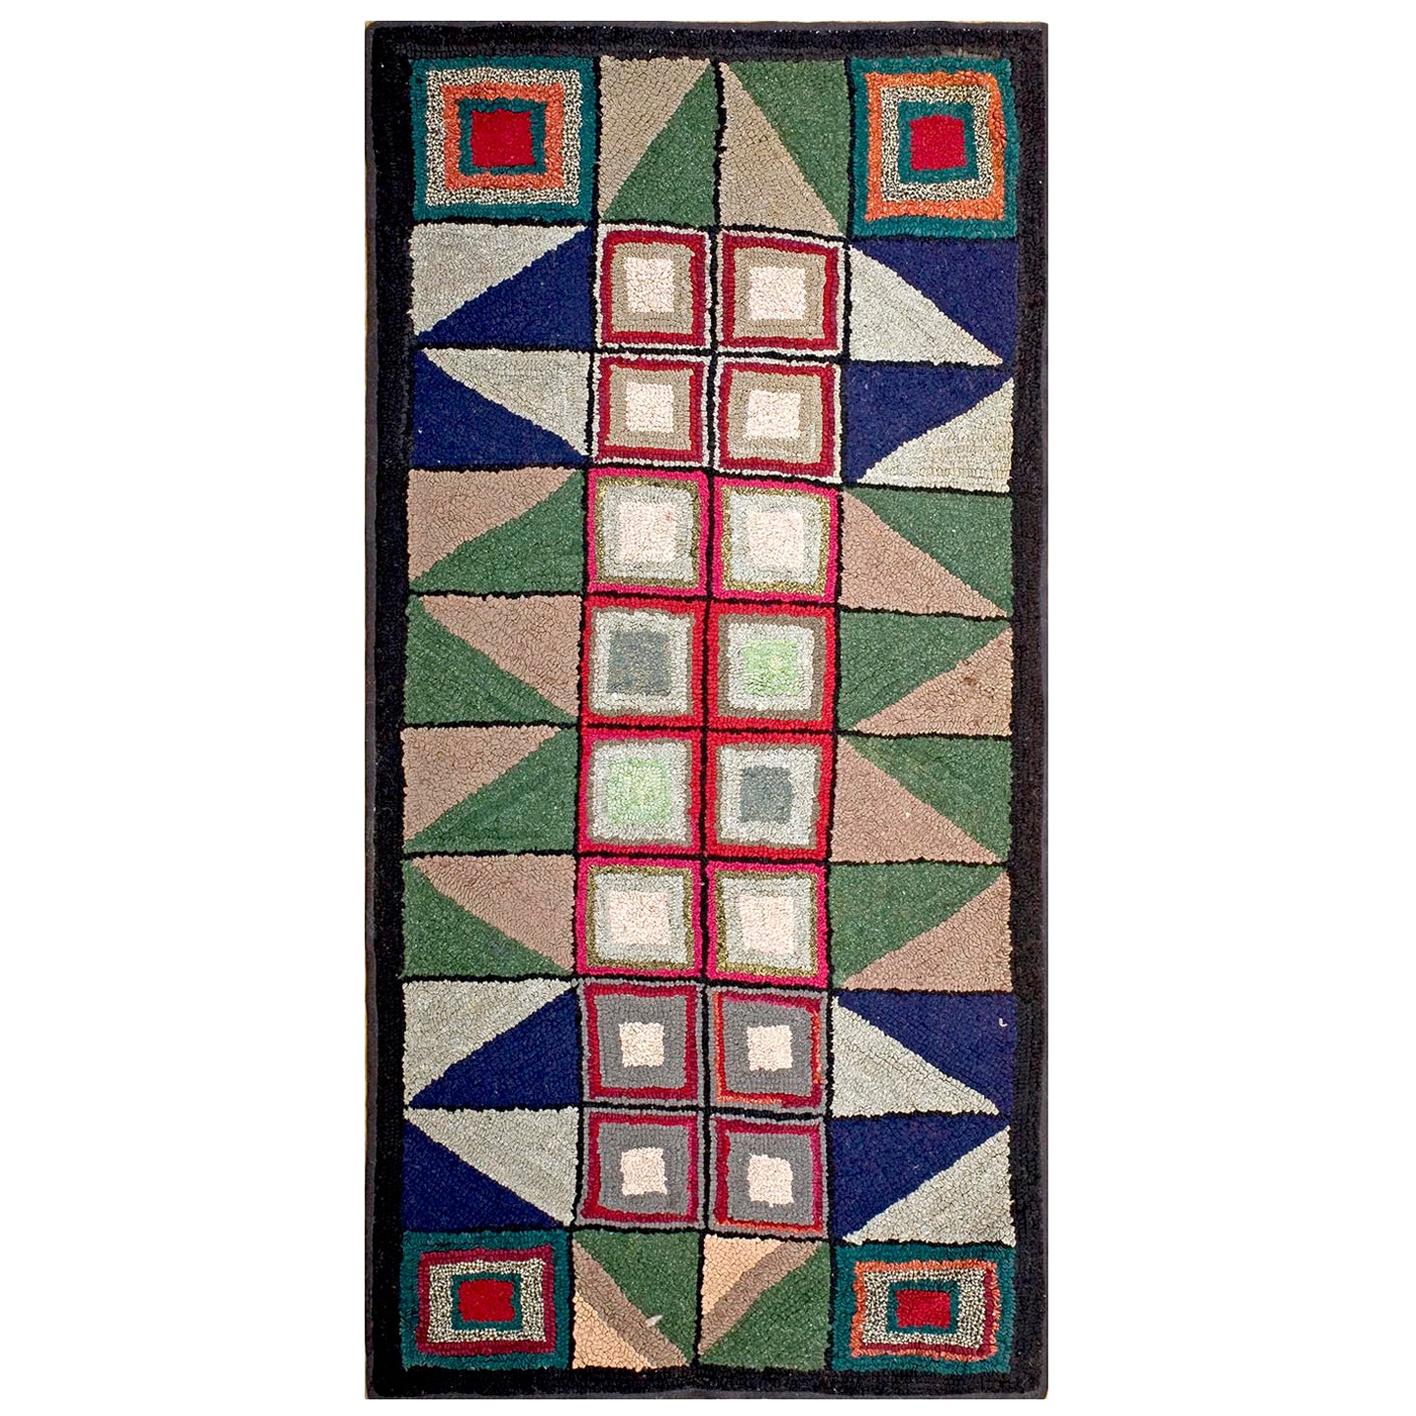 Antique American Hooked Rug 3' 2" x 6' 4" For Sale